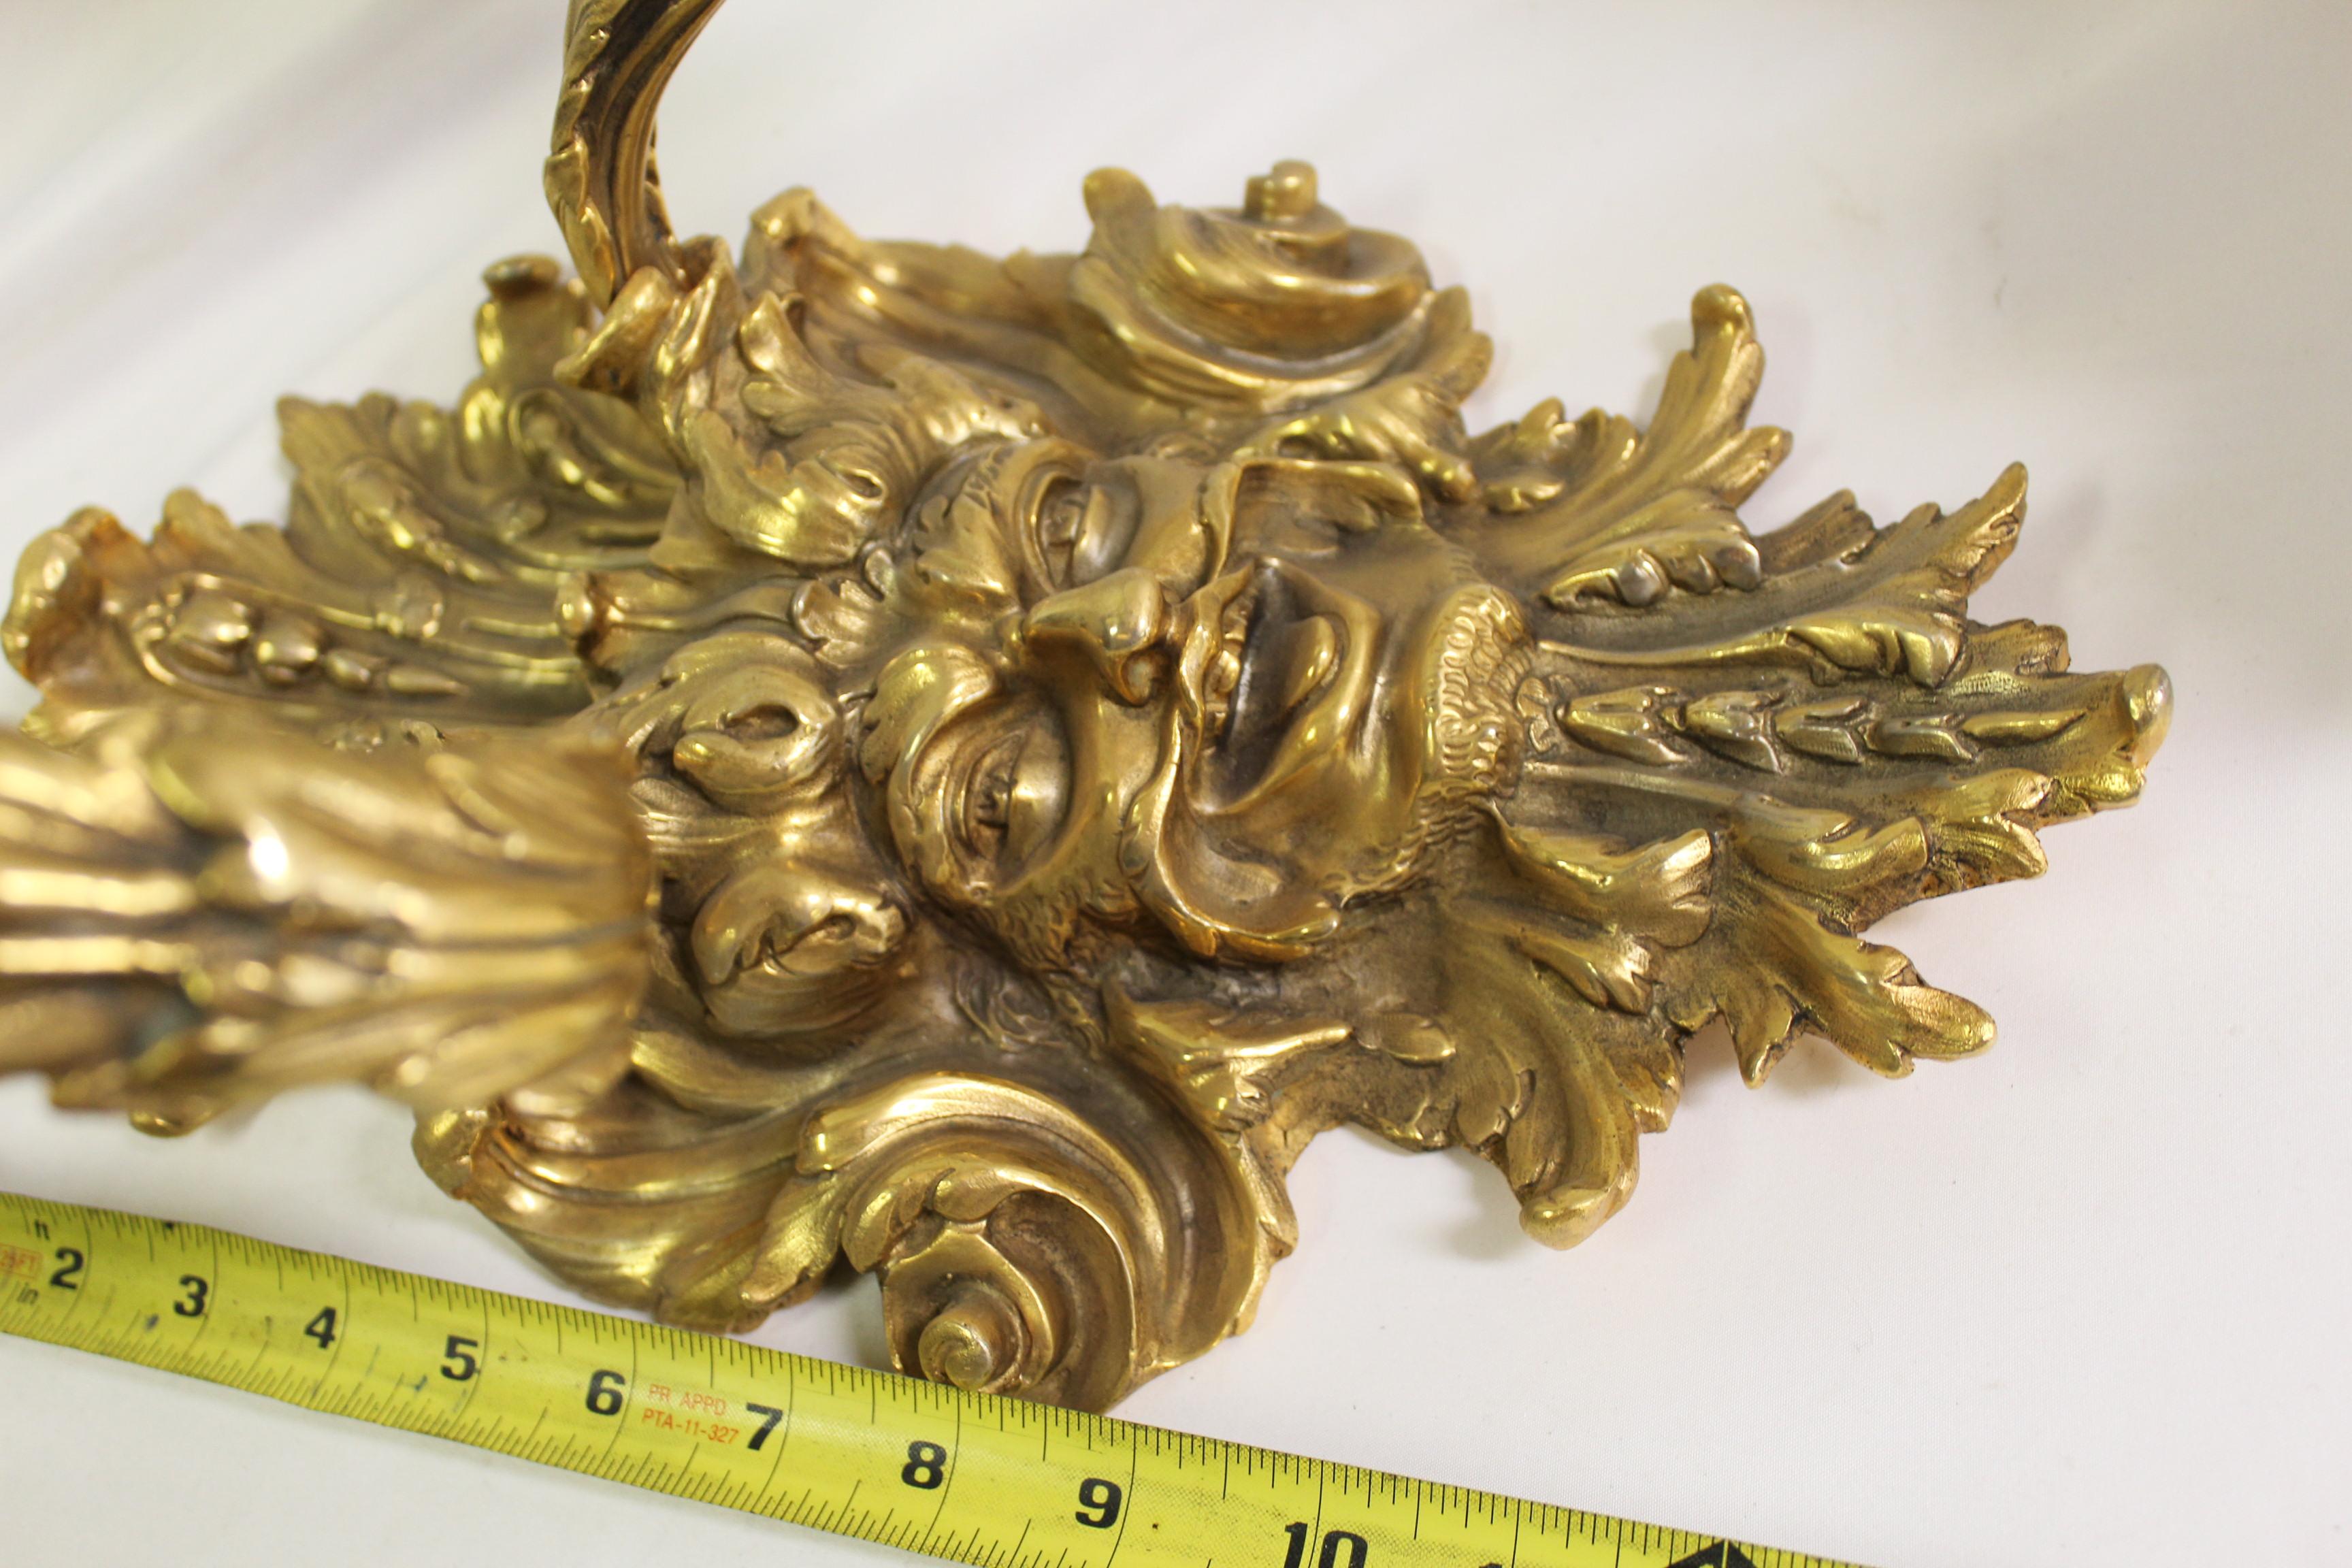 Empire Sconces W Grotesque Man's Face, Gold Finish, After Empire 2 Arms For Sale 1